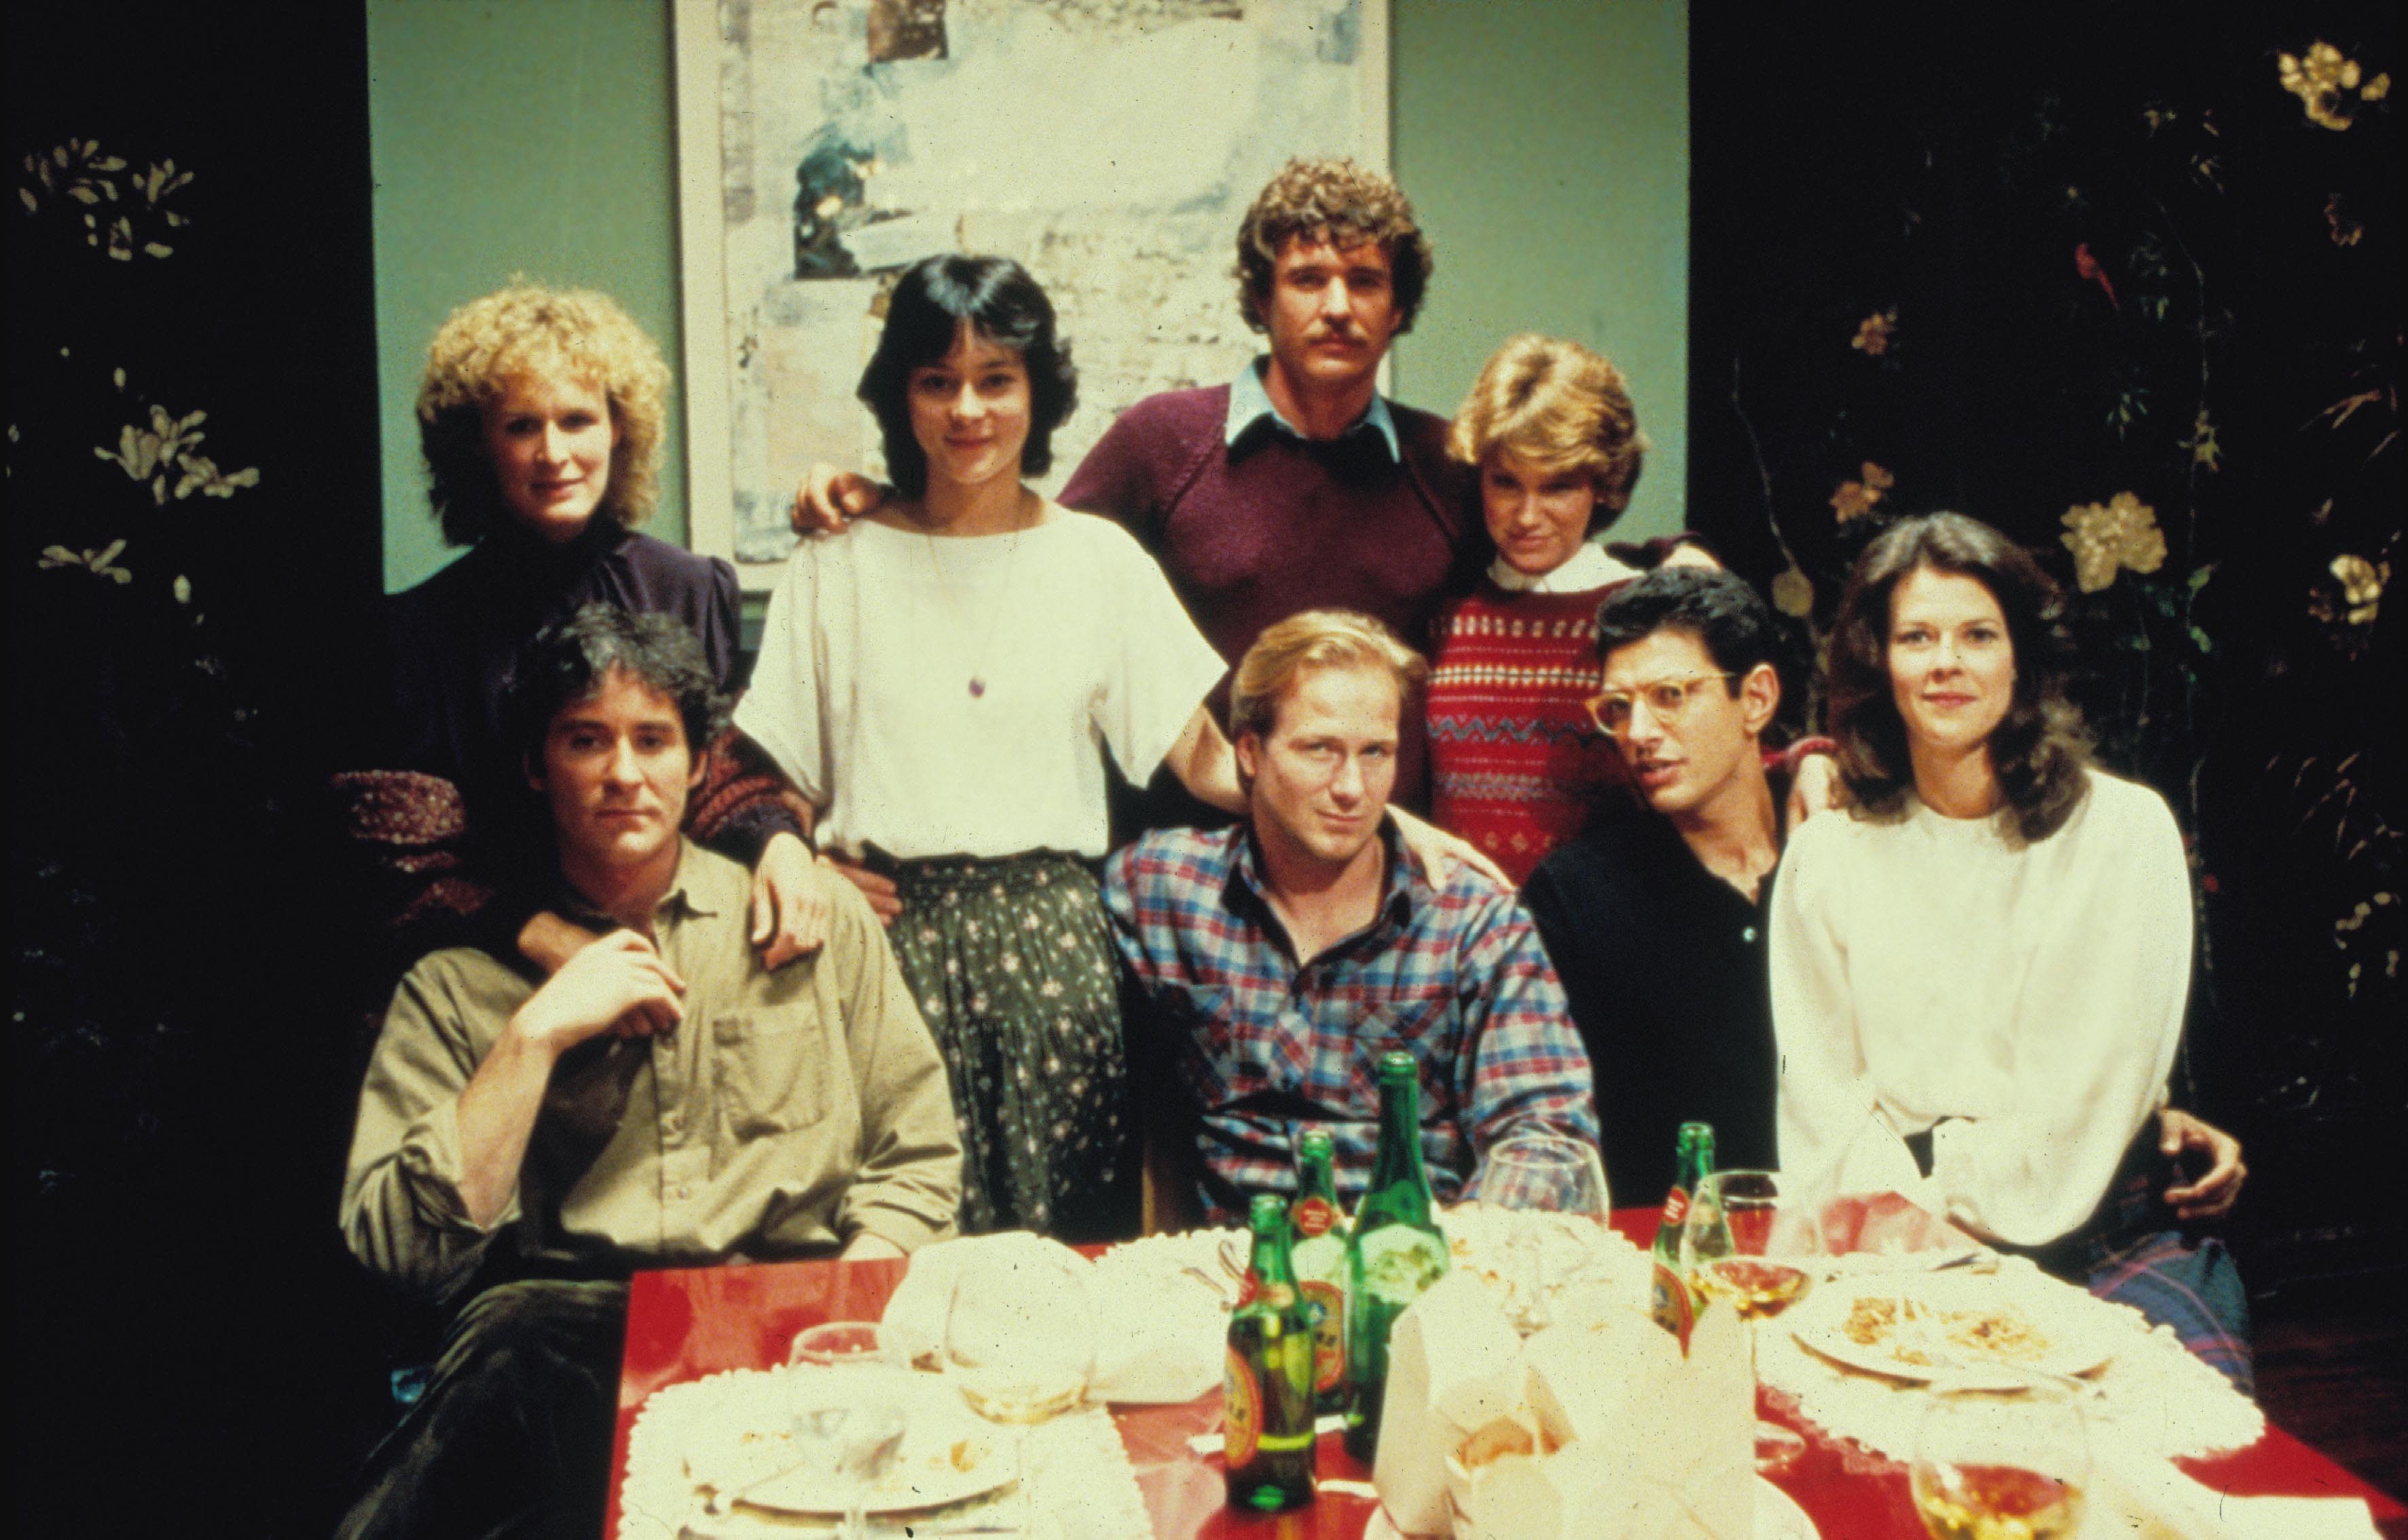 Friends forever: Glenn Close, Meg Tilly, Tom Berenger, Mary Kay Place, Kevin Kline, William Hurt, Jeff Goldblum and JoBeth Williams in ‘The Big Chill’ (1983)